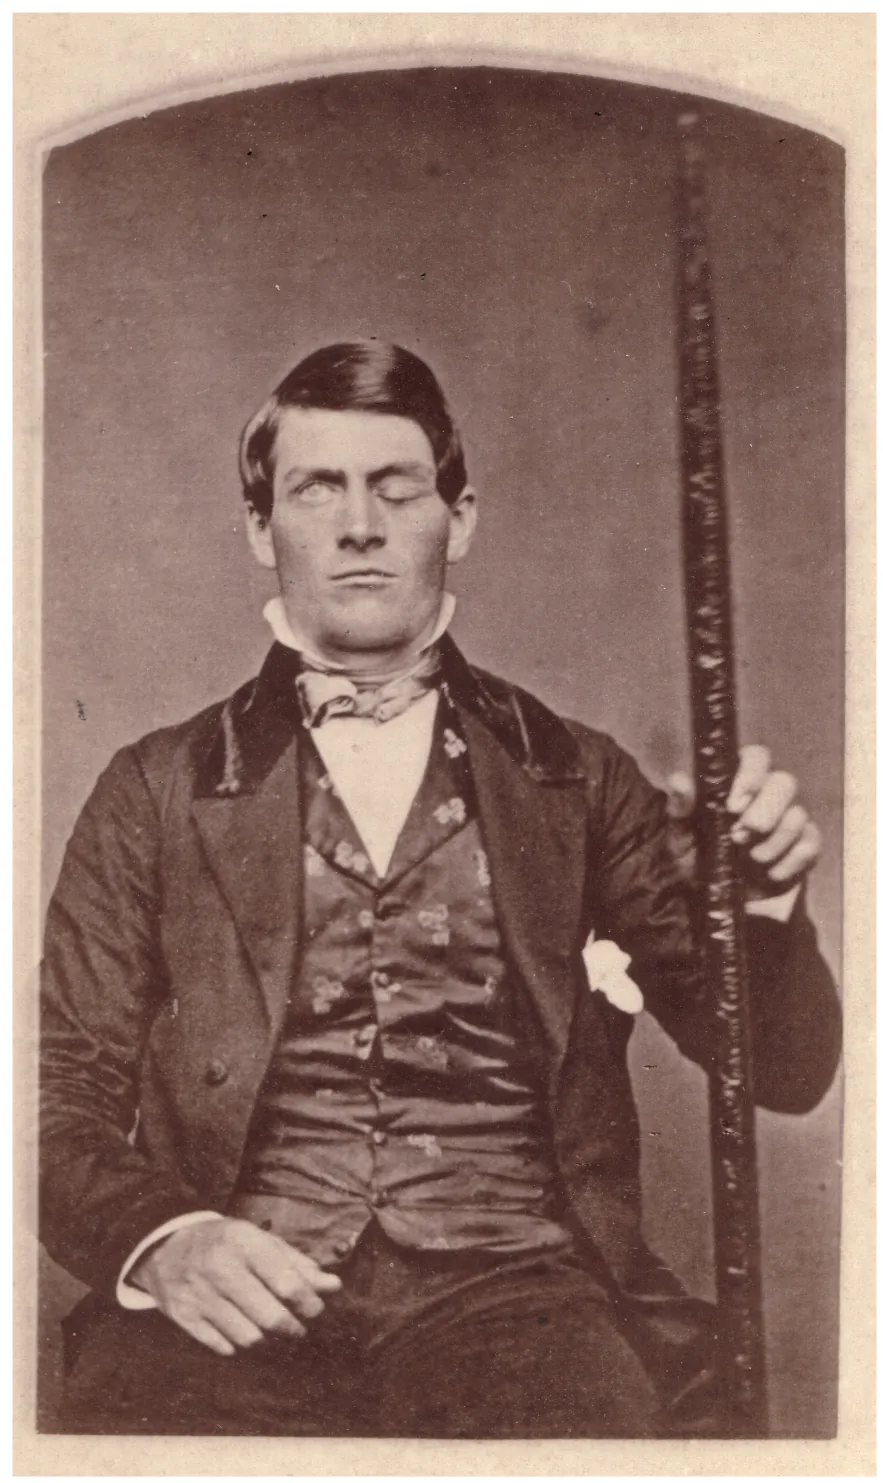 This photo shows Phineas Gage holding the metal spike that impaled his prefrontal cortex.